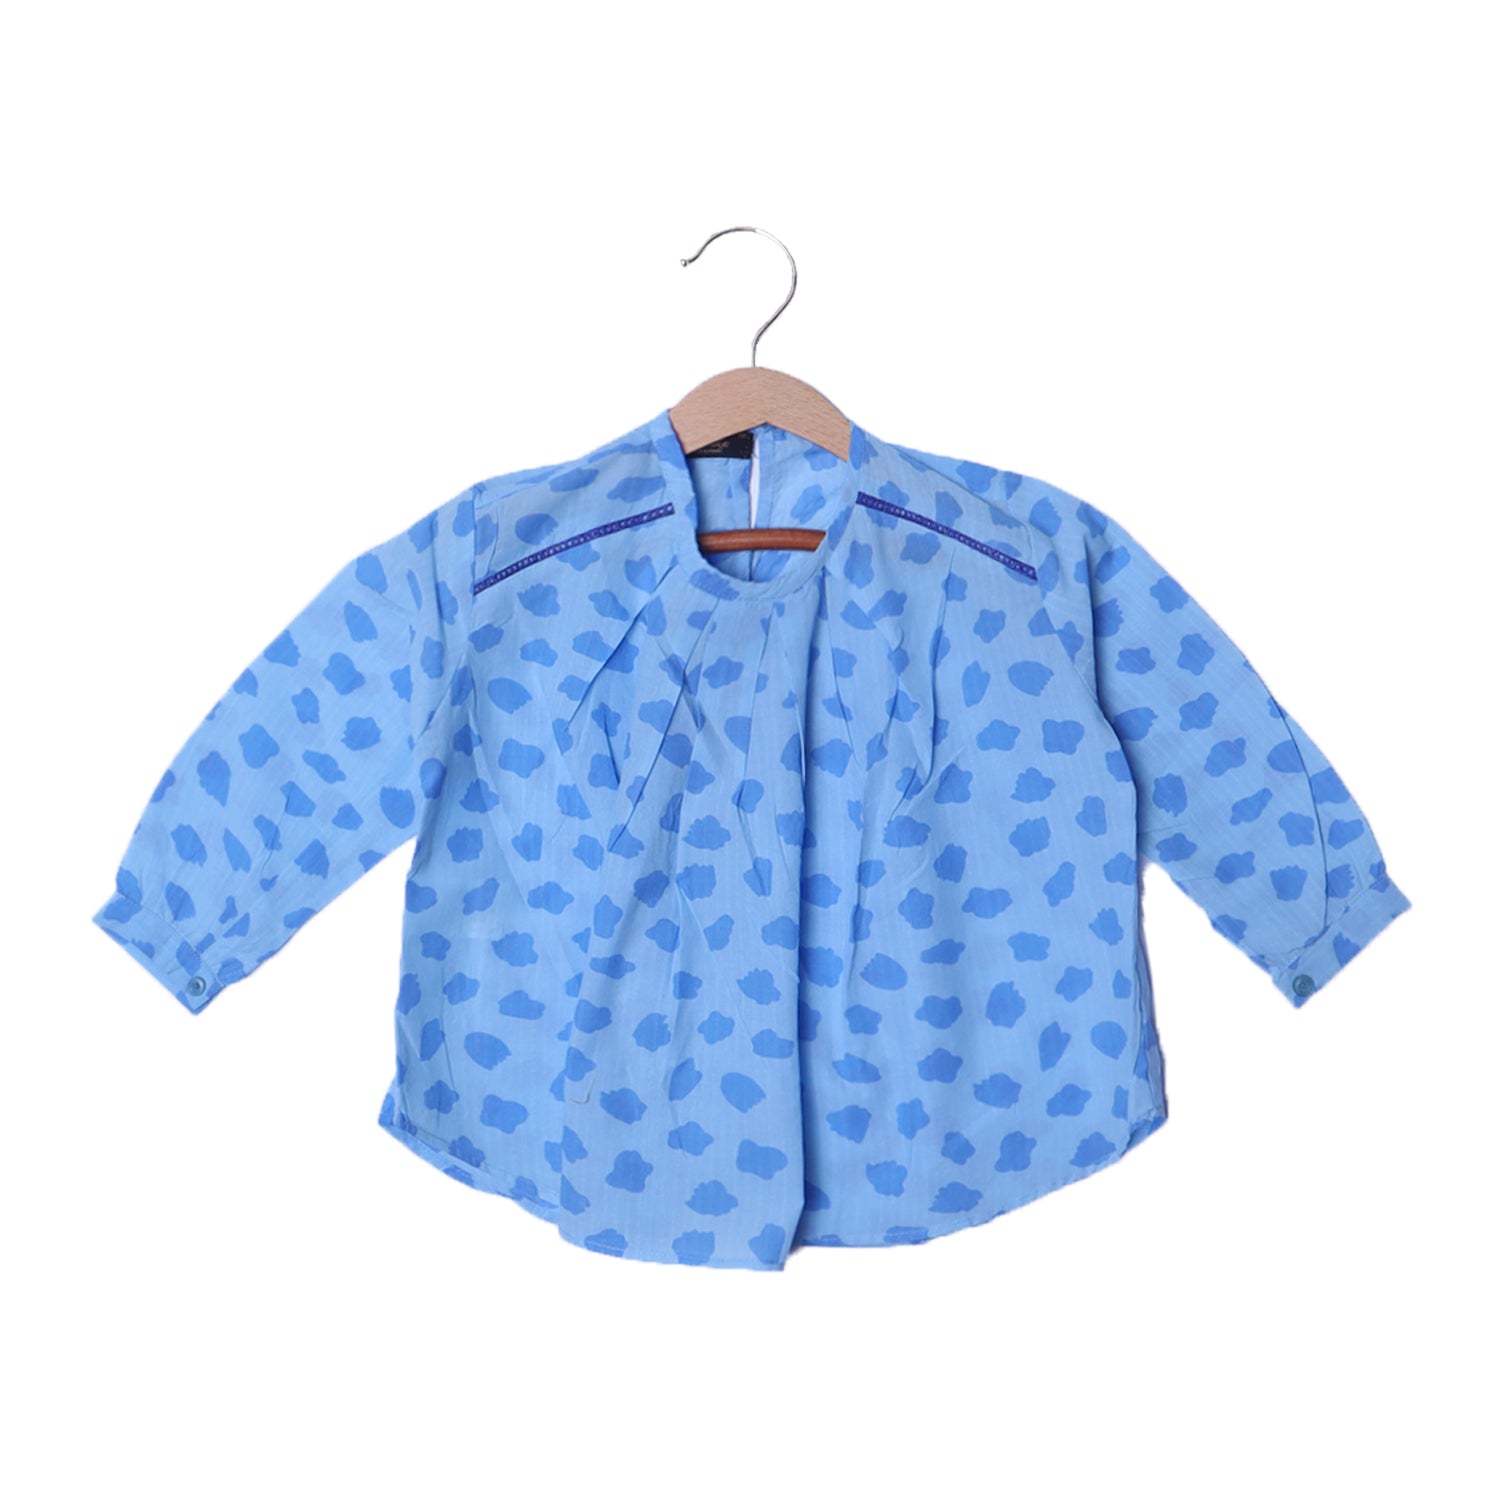 SKY BLUE WITH BLUE SPOTS PRINTED TOP FROCK FOR GIRLS